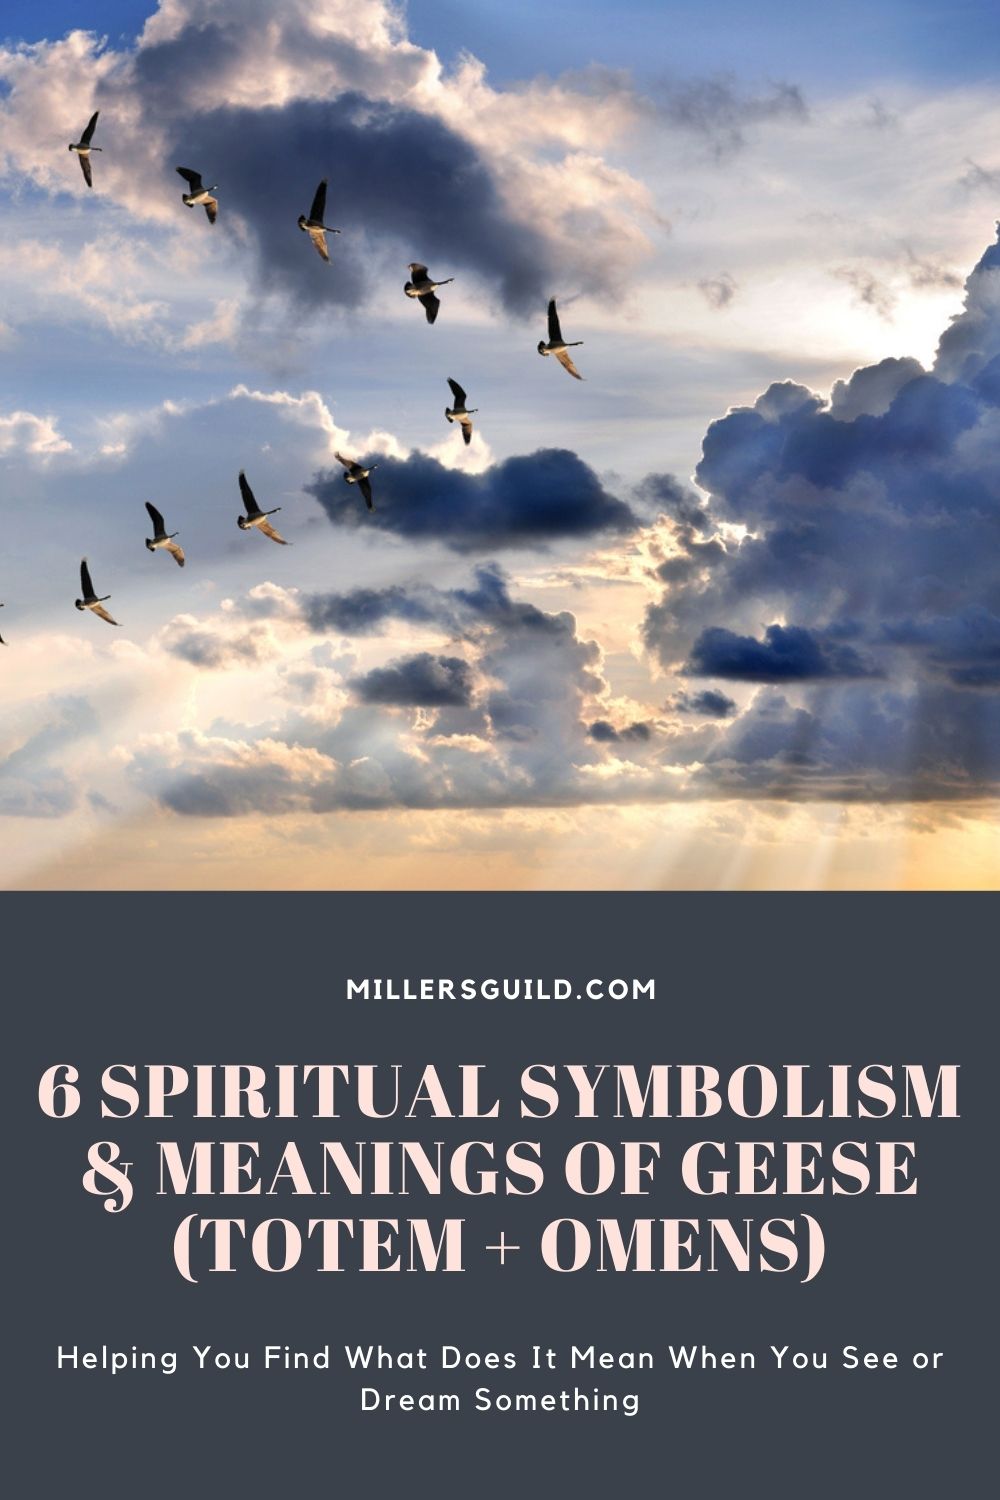 6 Spiritual Symbolism & Meanings of Geese (Totem + Omens) 2